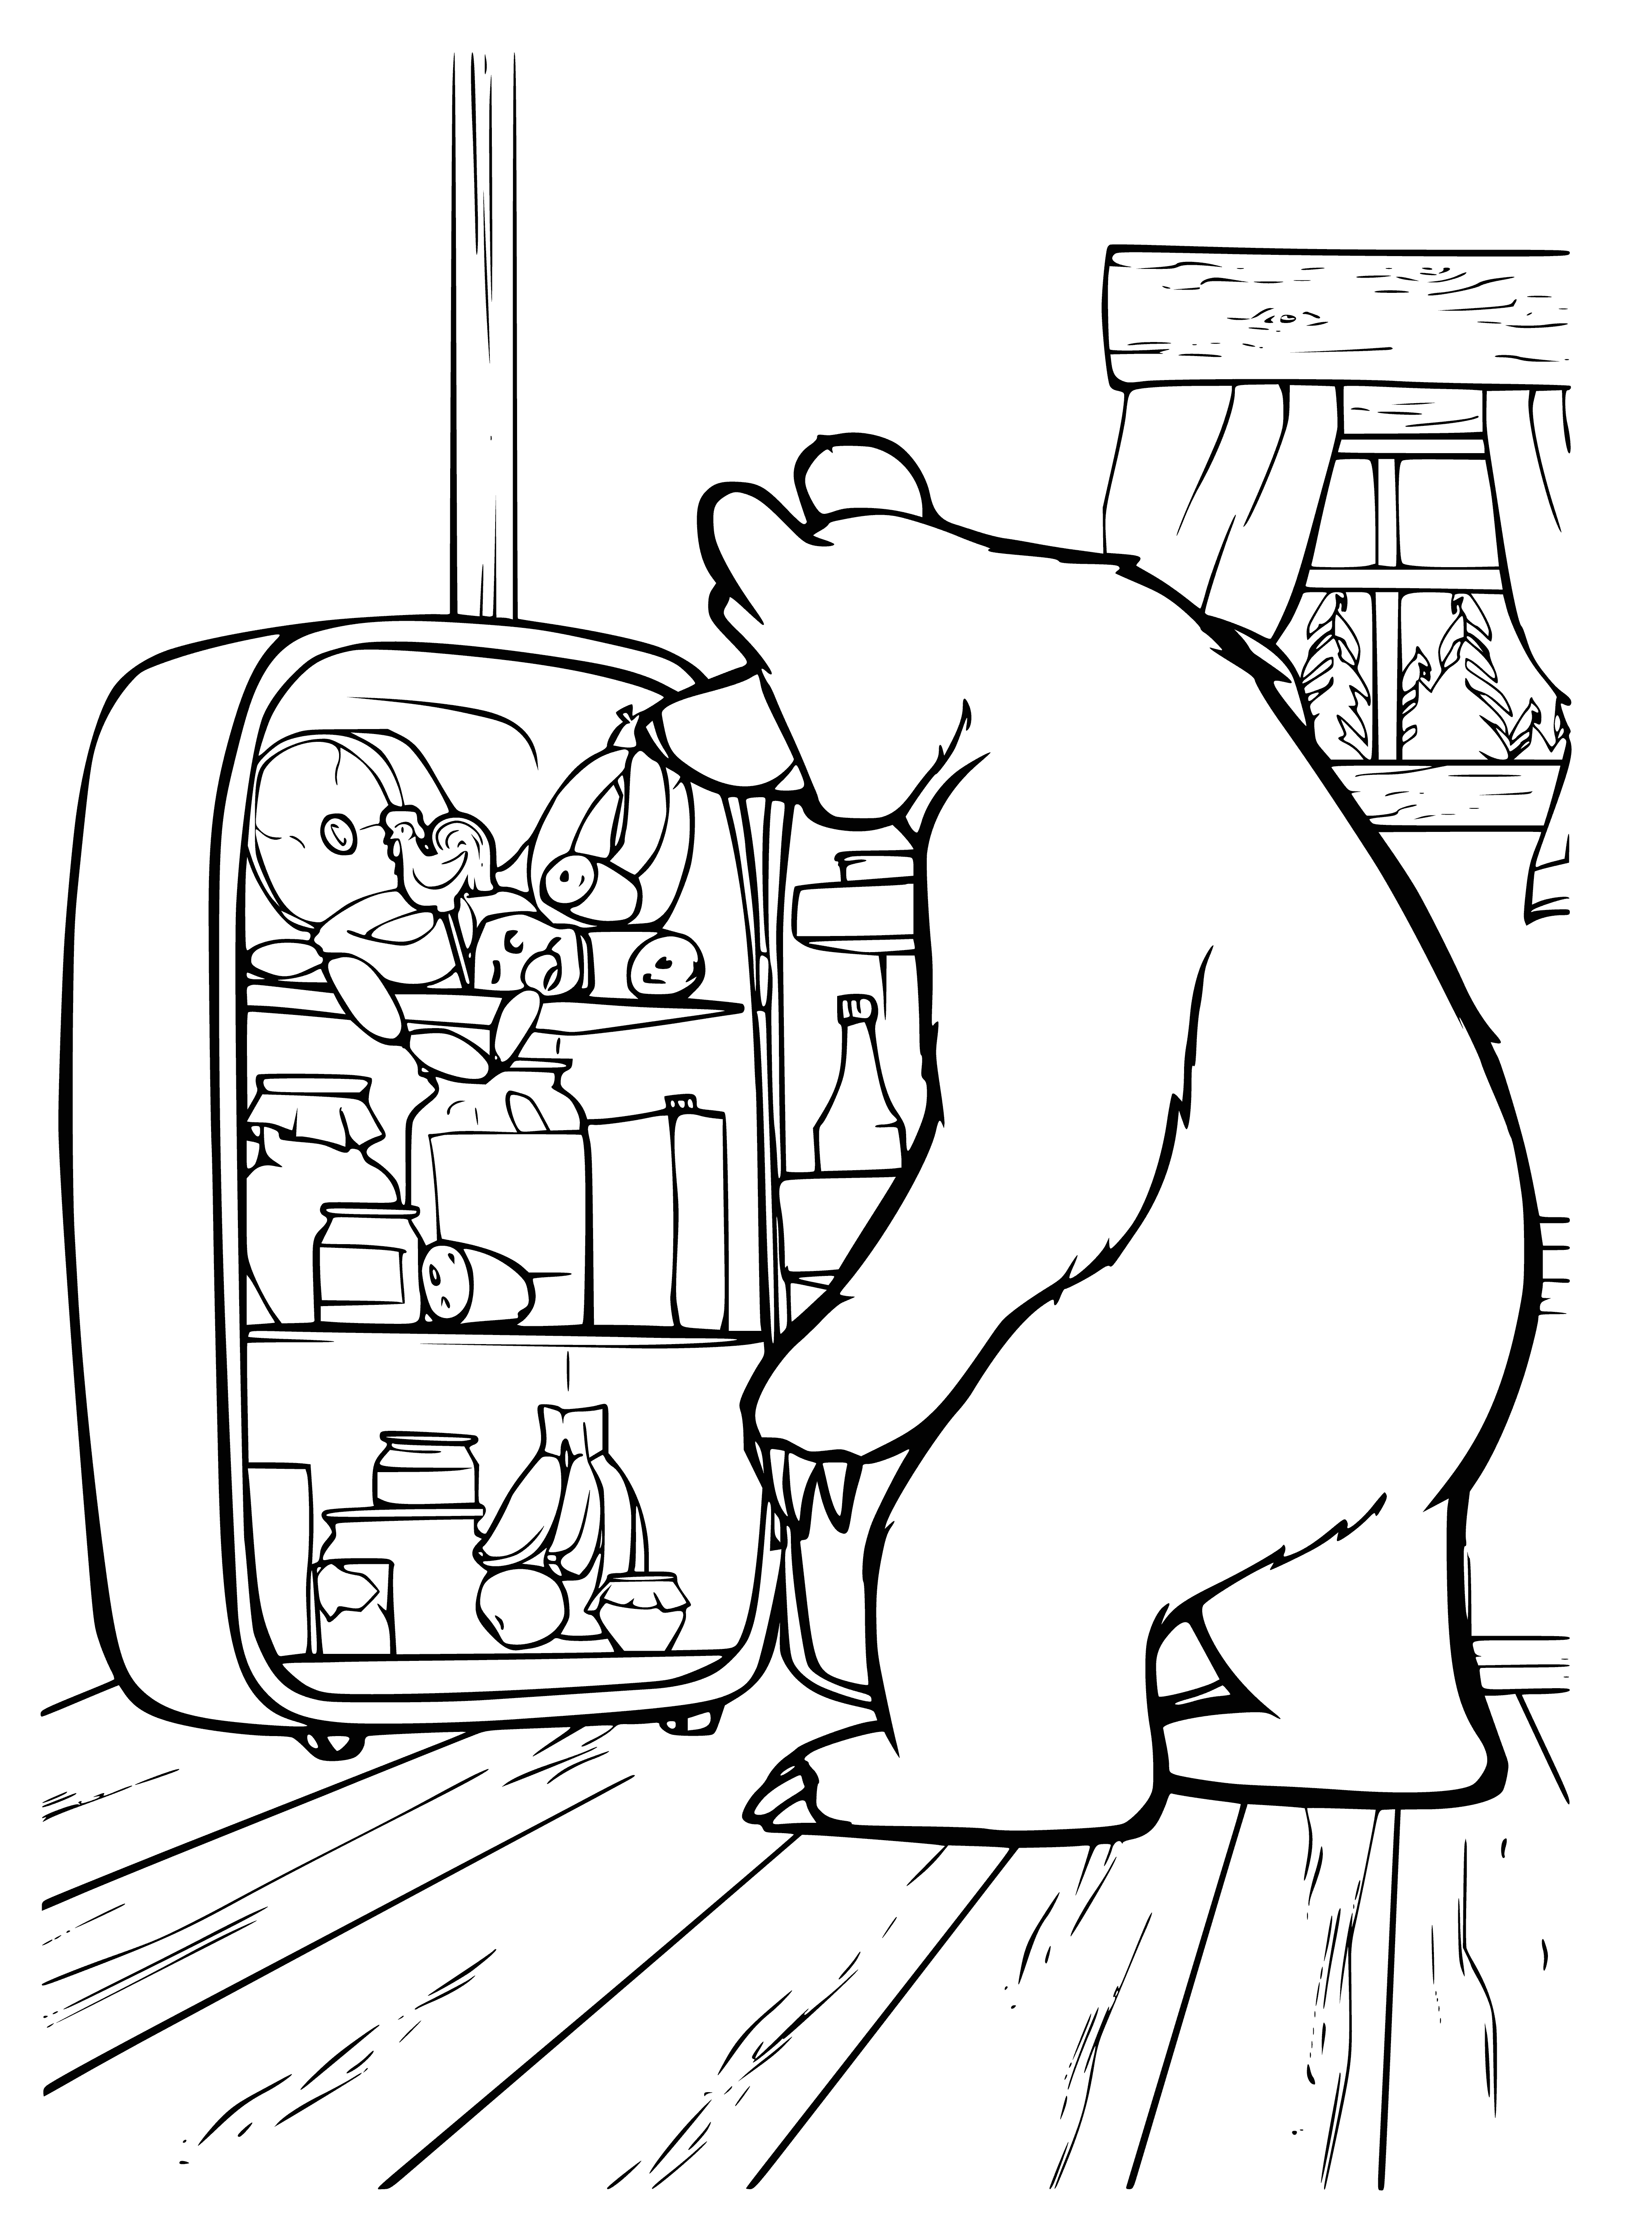 coloring page: Masha and the Bear have a large rectangular fridge with two doors and shelves inside. Has a large handle for easy opening.